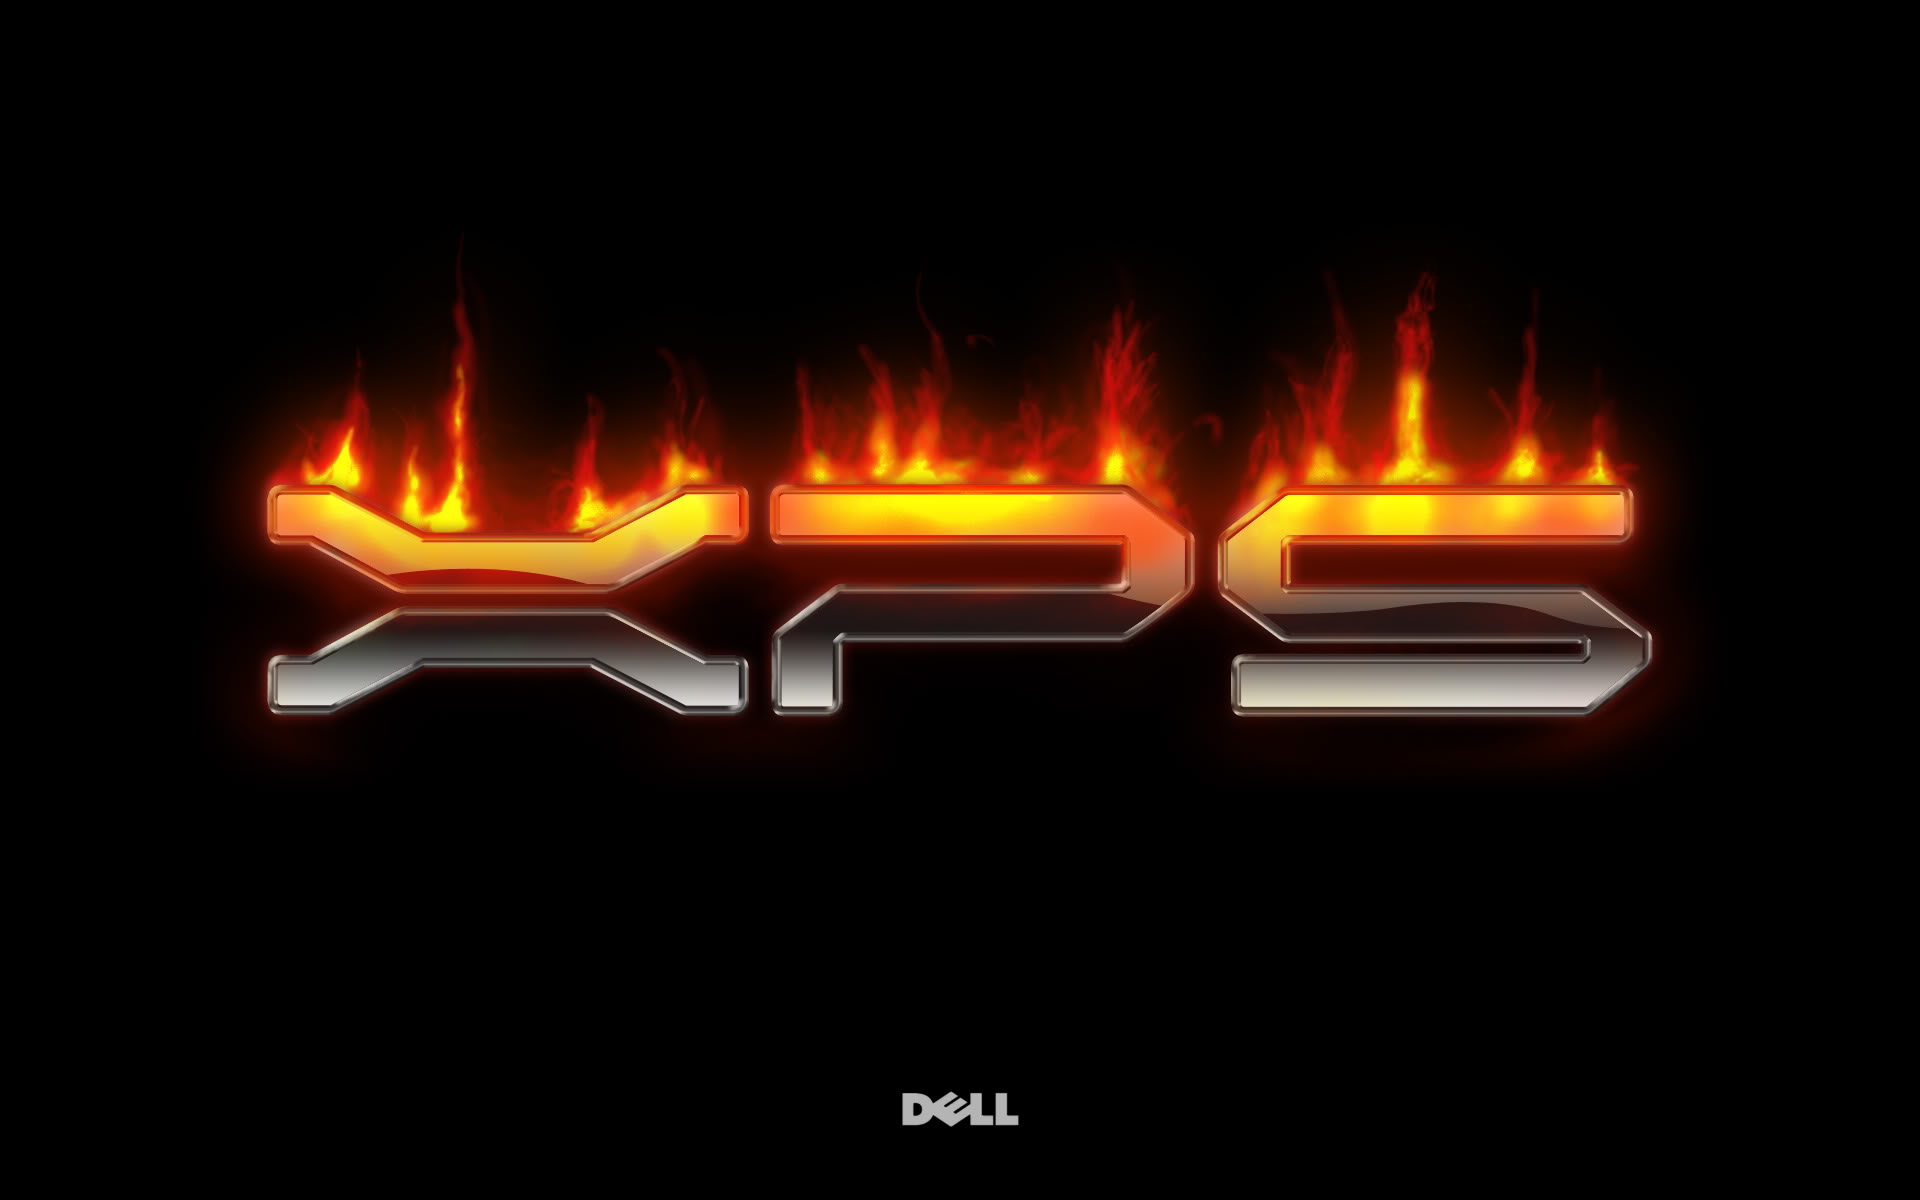 Dell Xps Wallpaper High Definition